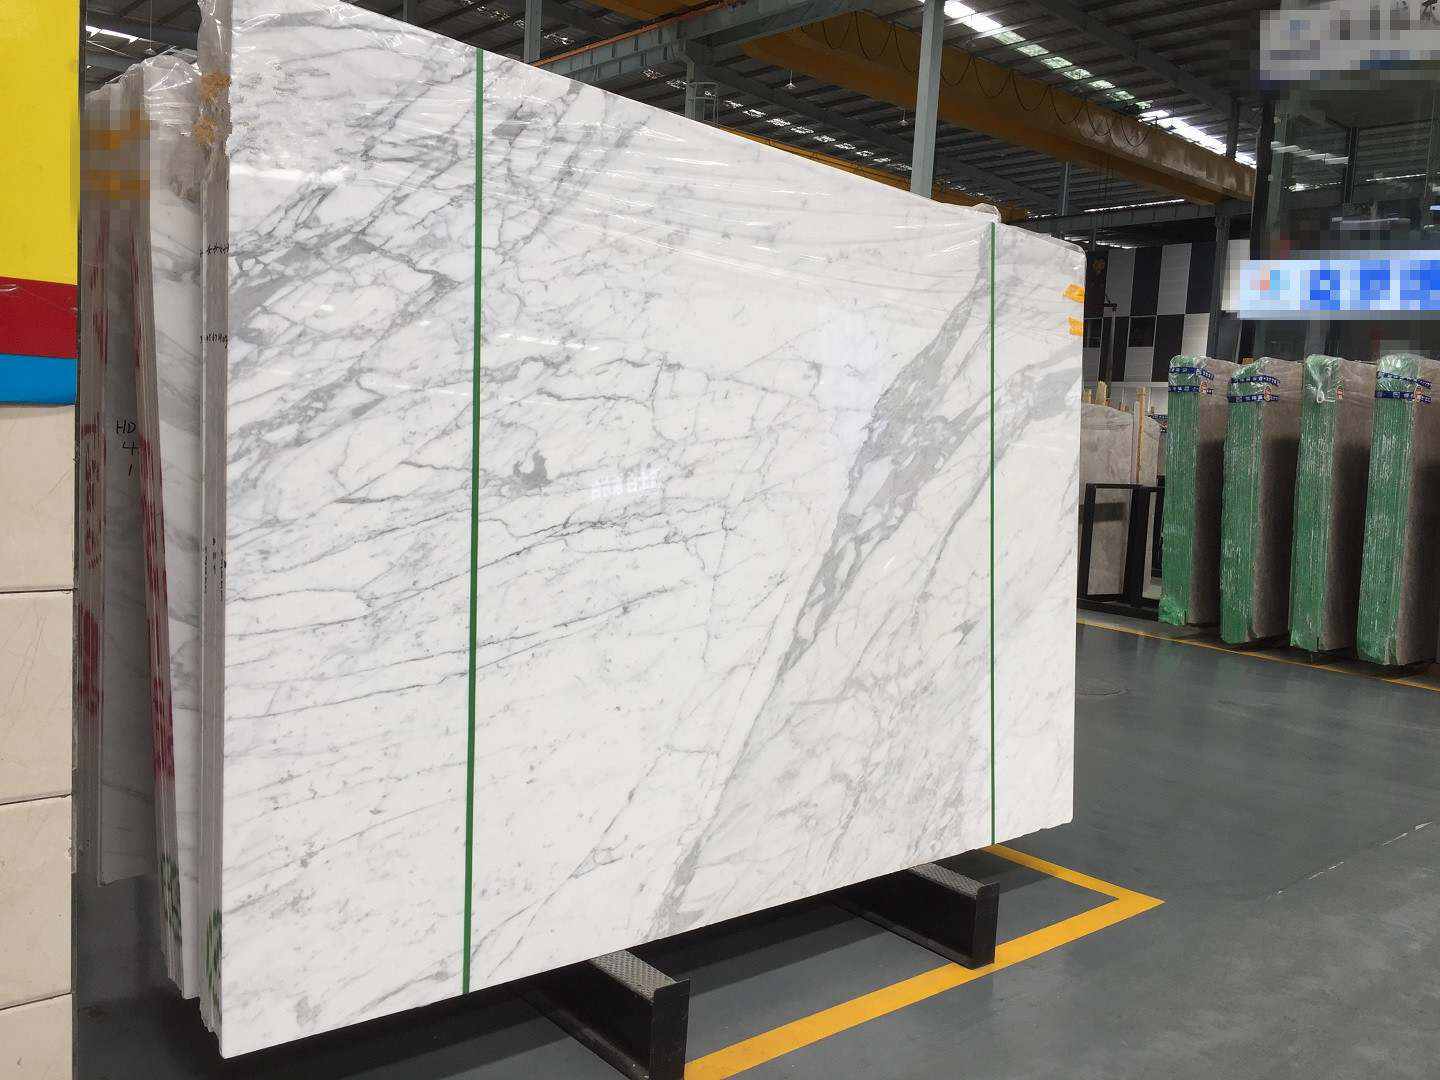 How Much is a Slab of Calacatta Gold Marble